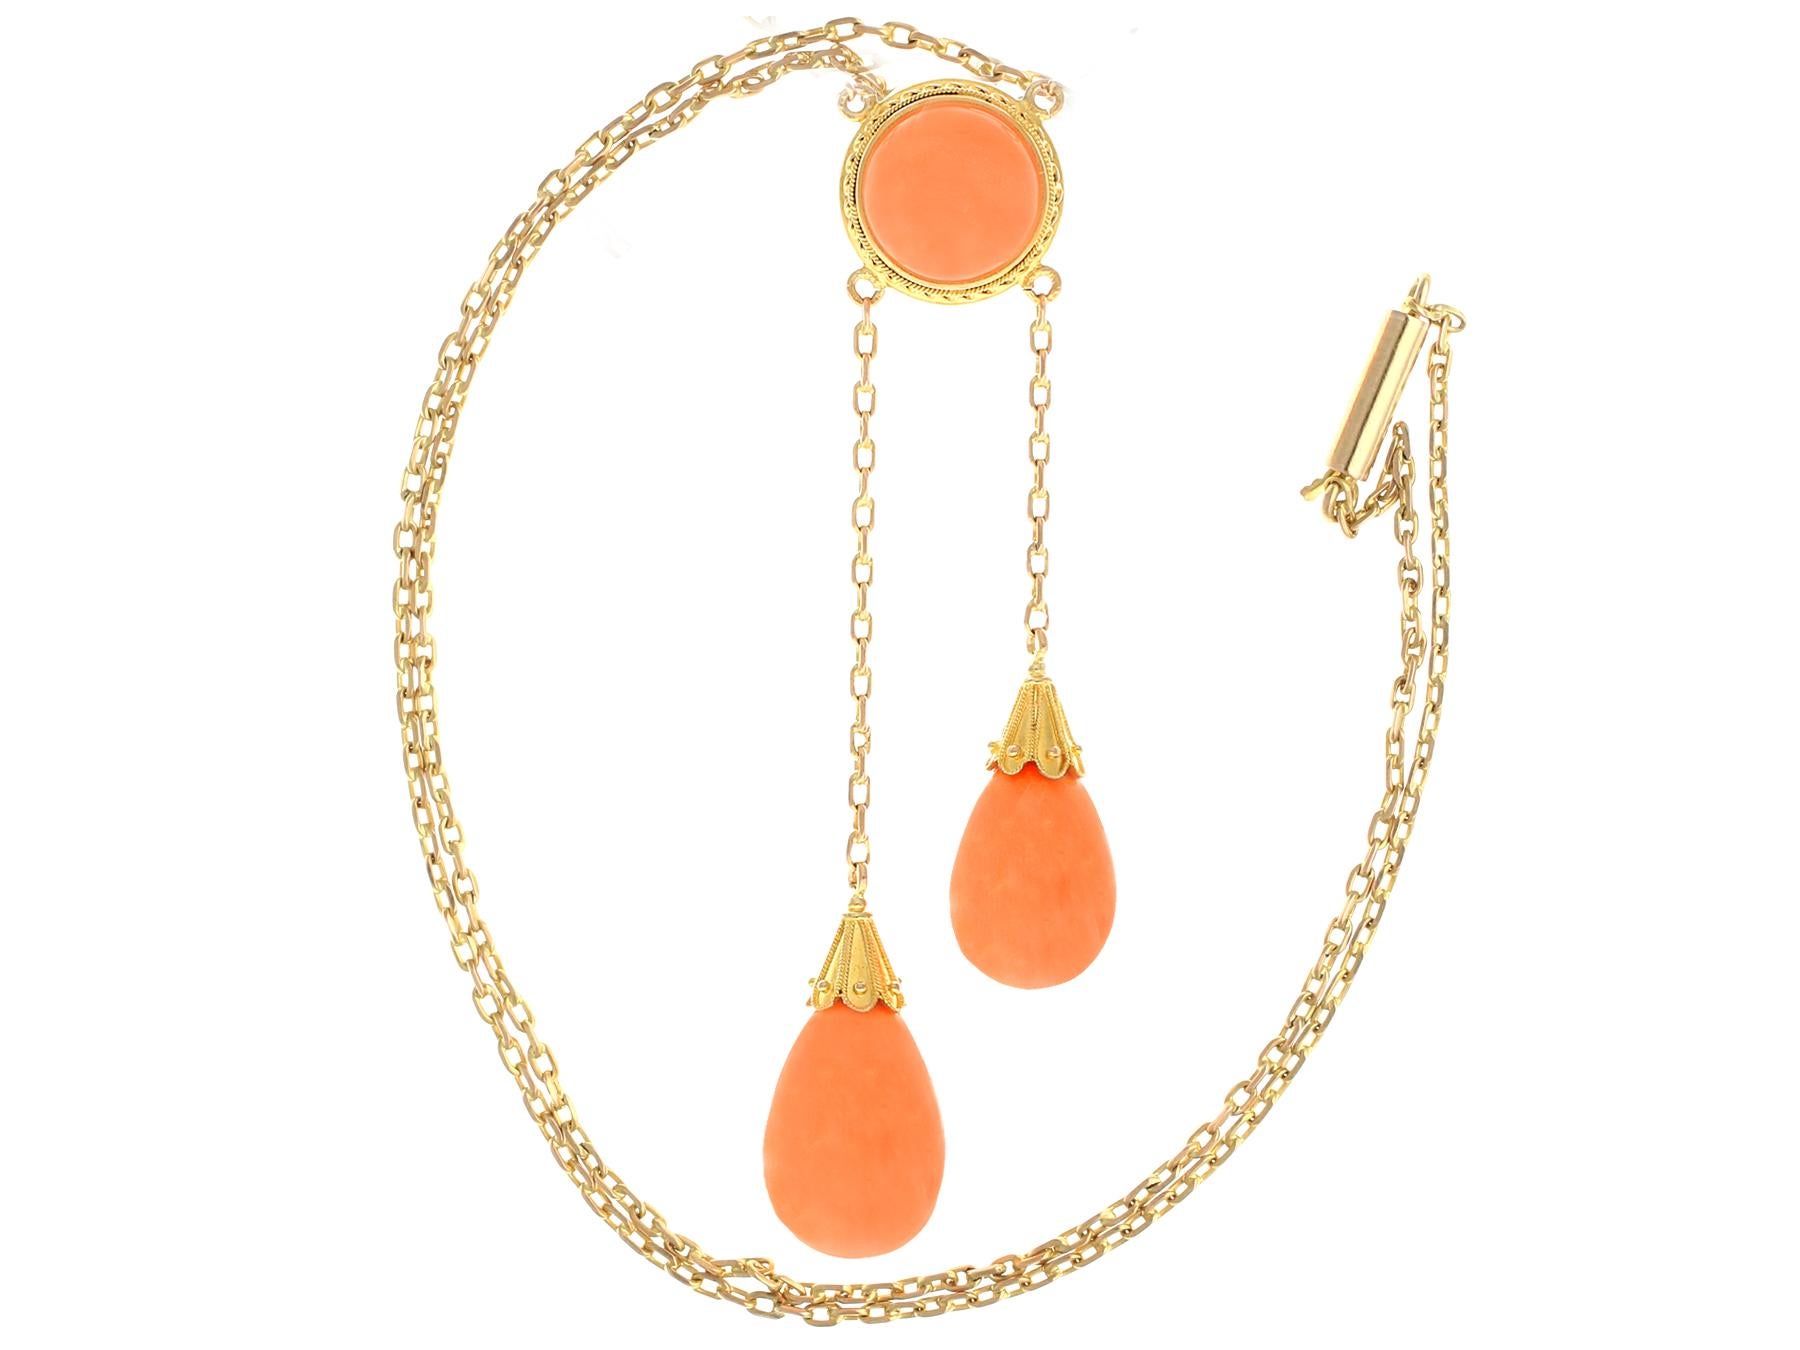 A stunning antique Victorian 1870's 35.22 carat coral and 12 karat yellow gold drop necklace; part of our diverse antique jewellery and estate jewelry collections.

This stunning, fine and impressive Victorian necklace has been crafted in 12k yellow